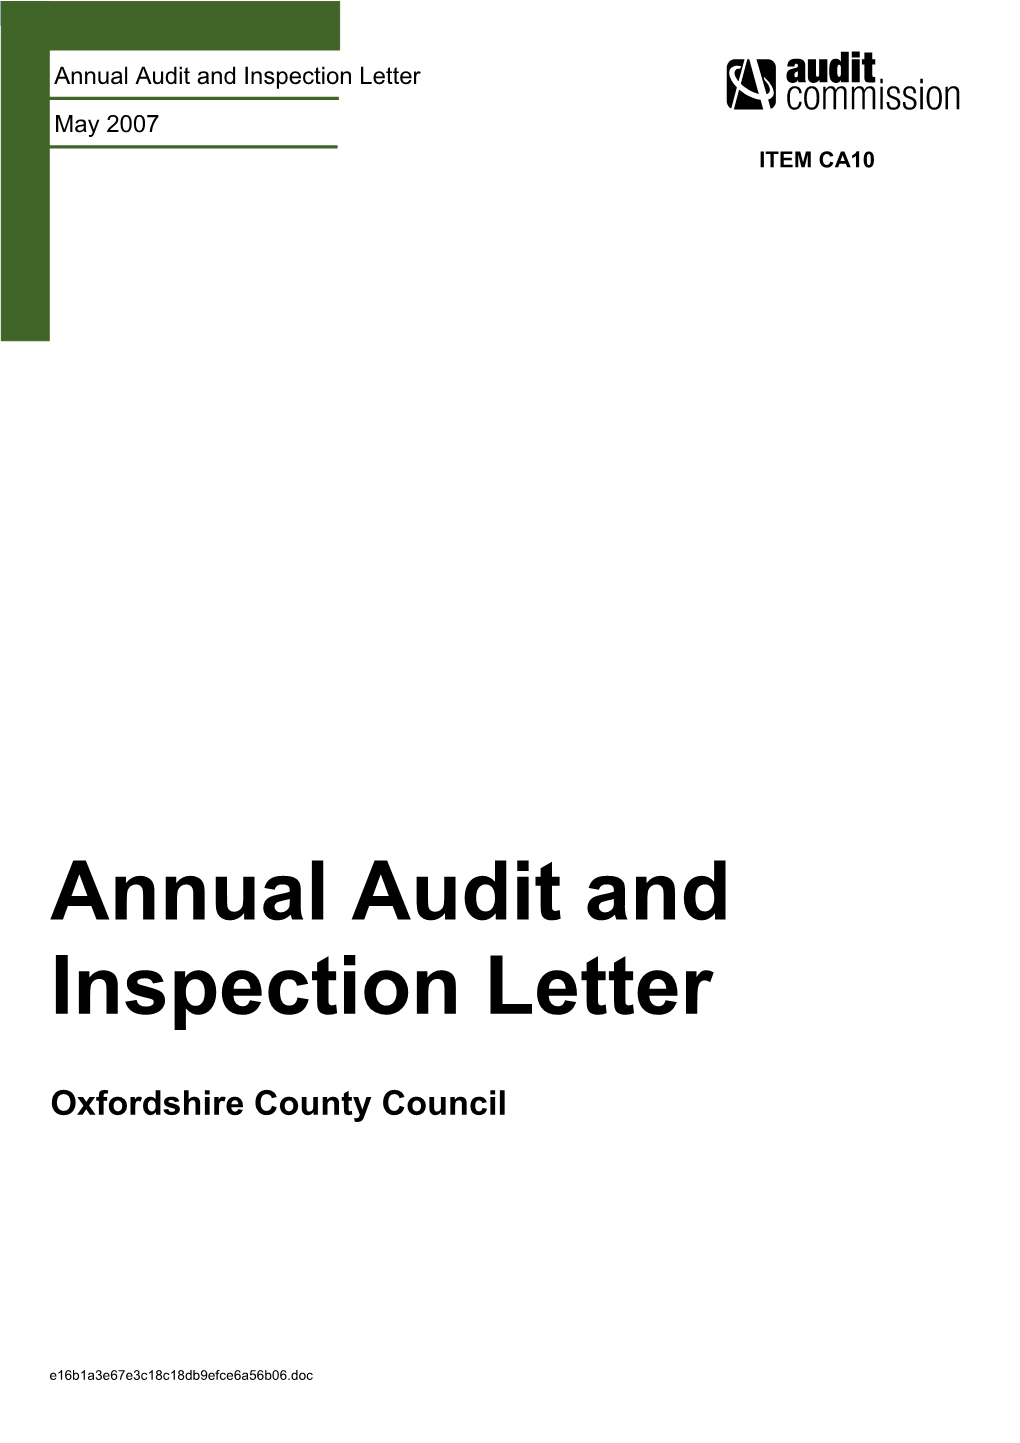 Annual Audit and Inspection Letter